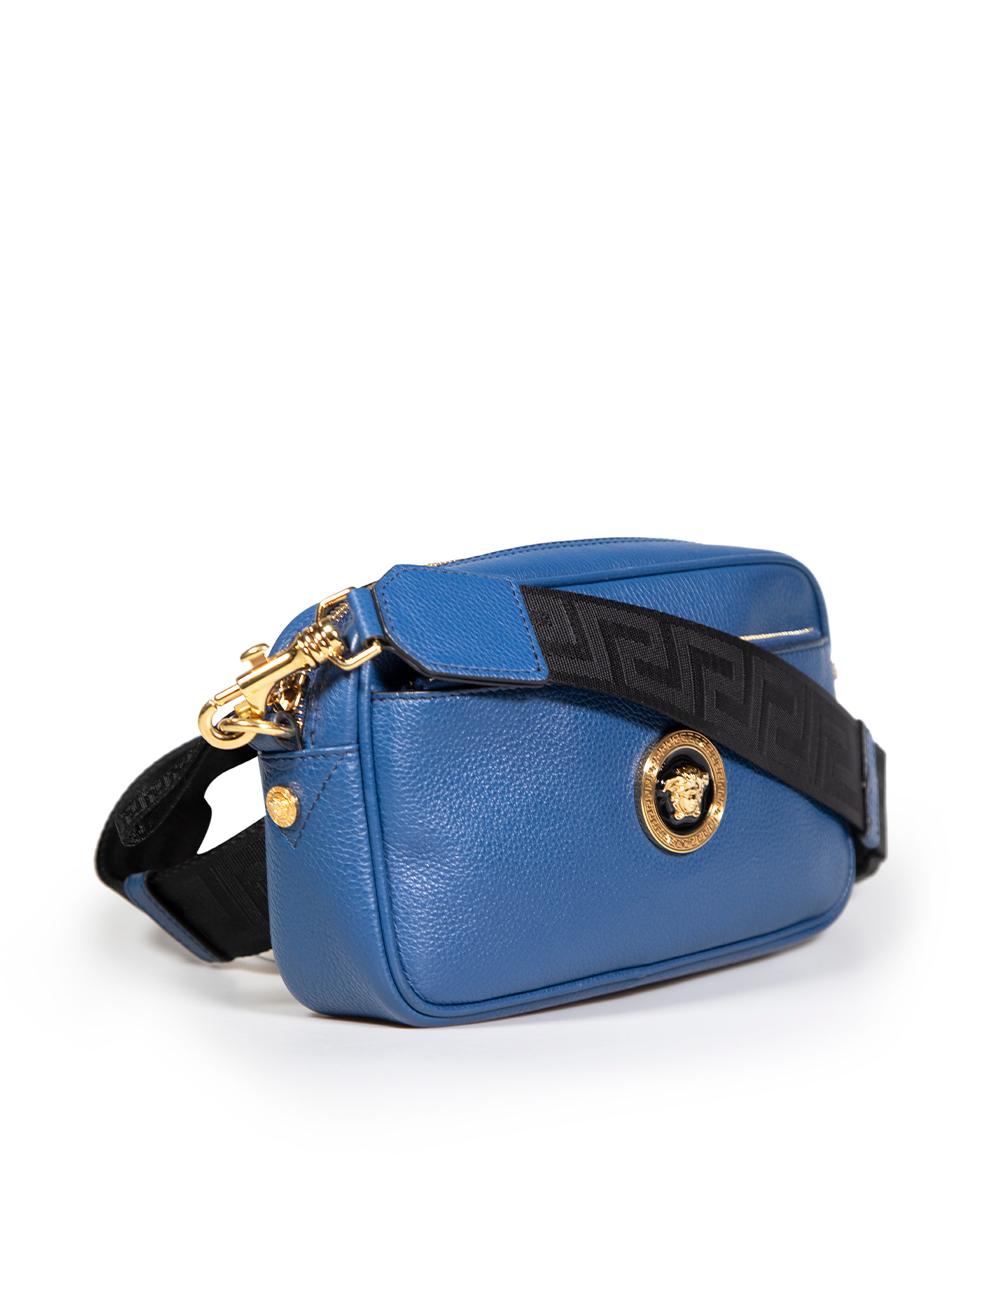 CONDITION is Very good. Hardly any visible wear to bag is evident on this used Versace designer resale item.
 
 Details
 Blue
 Leather
 Mini crossbody bag
 Gold tone hardware
 Detachable and adjustable strap
 Front logo plaque
 1x Main zipped